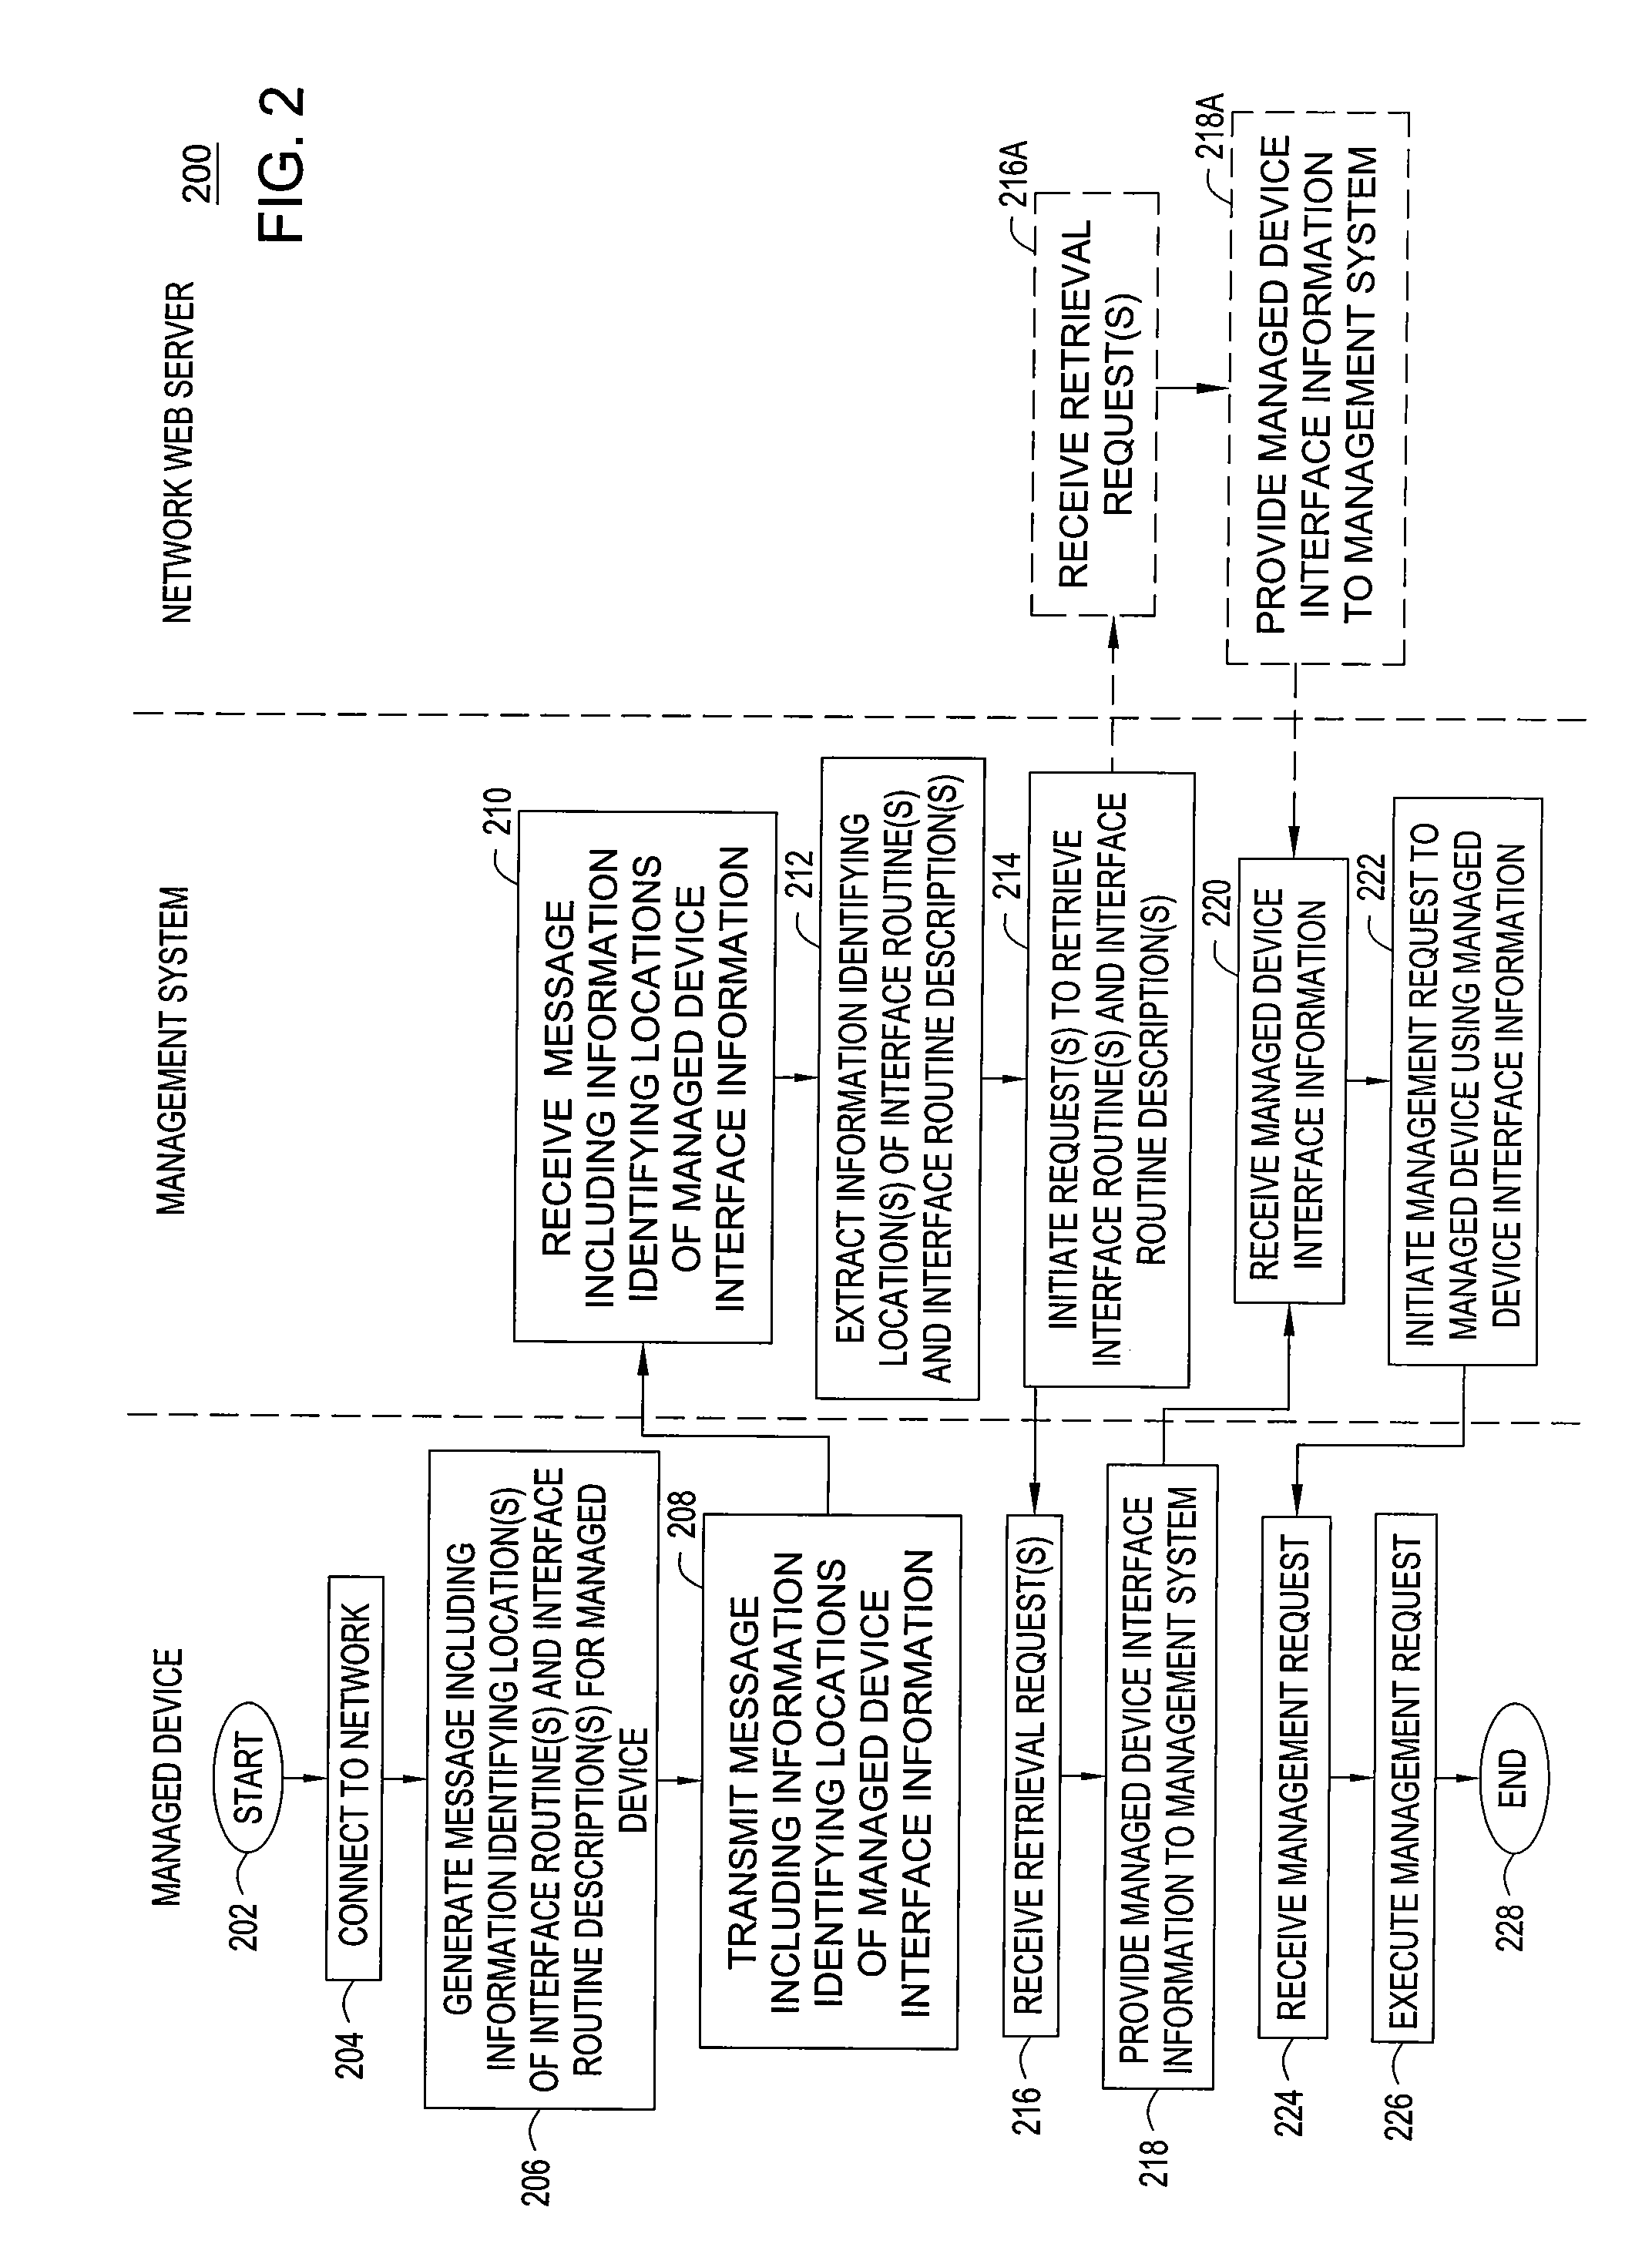 Method and Apparatus for Enabling a Management System to Interface with Managed Devices